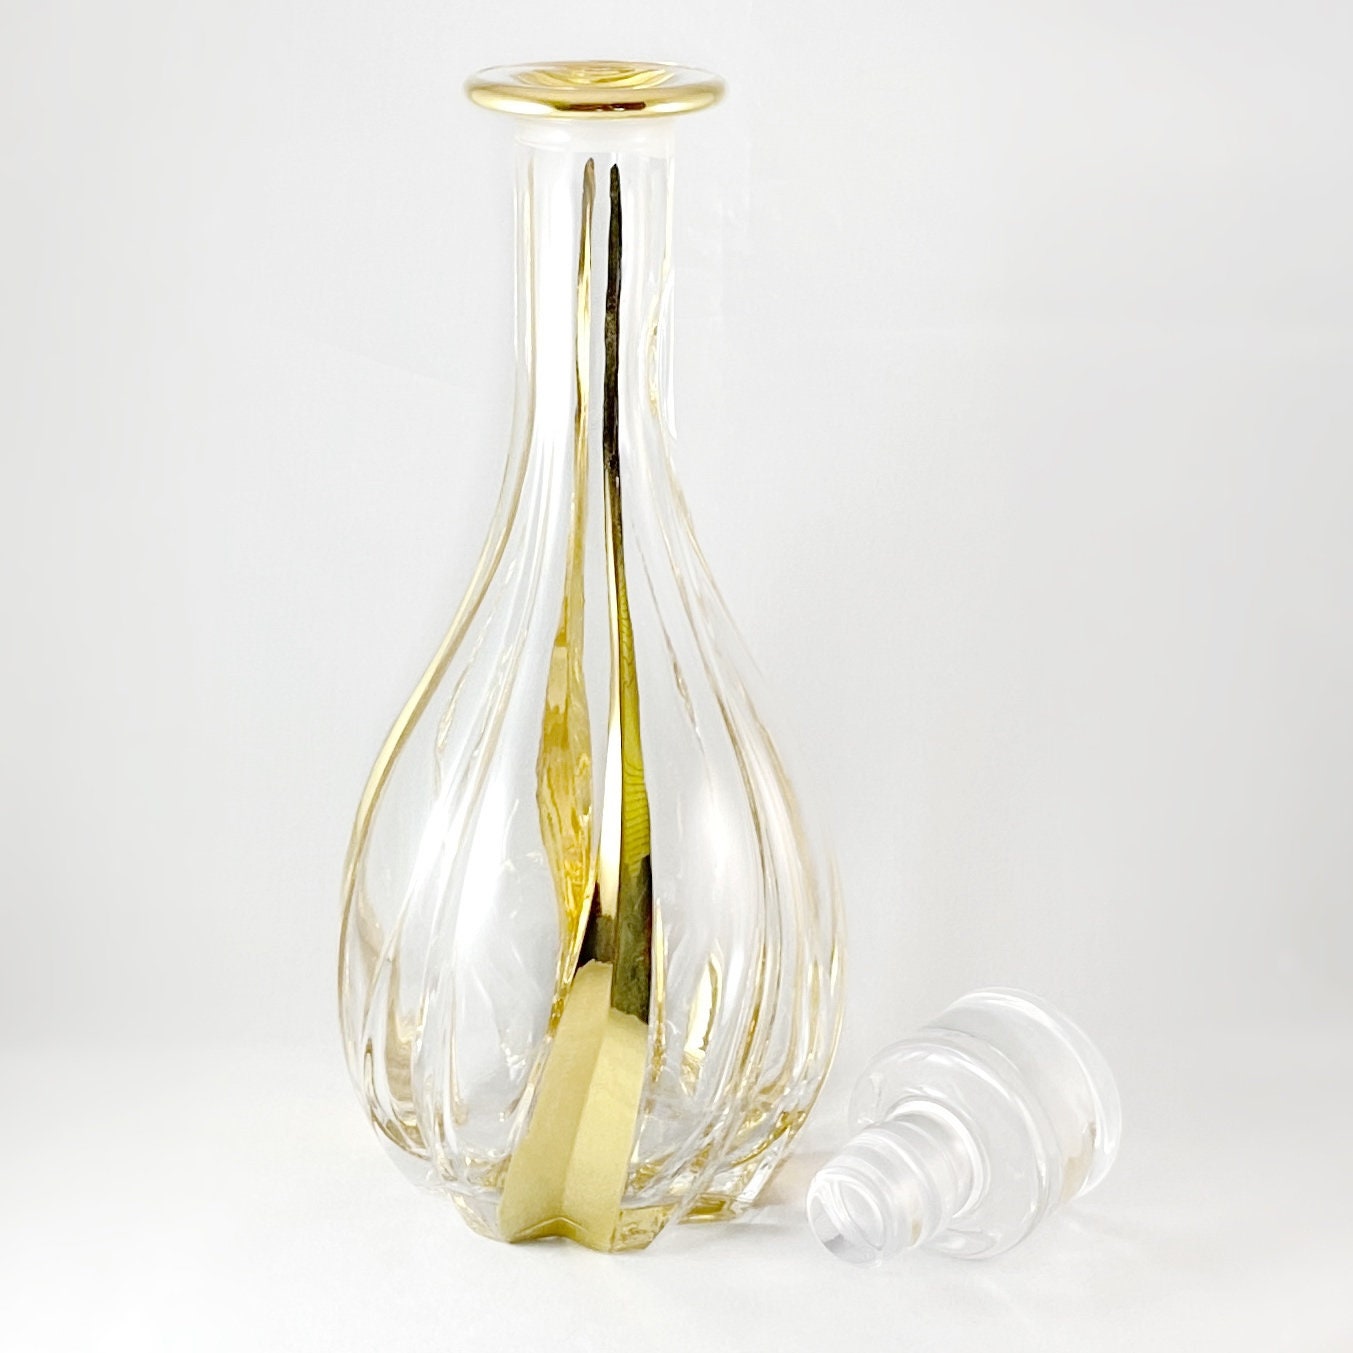 Trix Gold Whiskey Decanter, 24kt Gold Venetian Glass Whiskey Decanter  - Handmade in Italy, Colorful Murano Glass